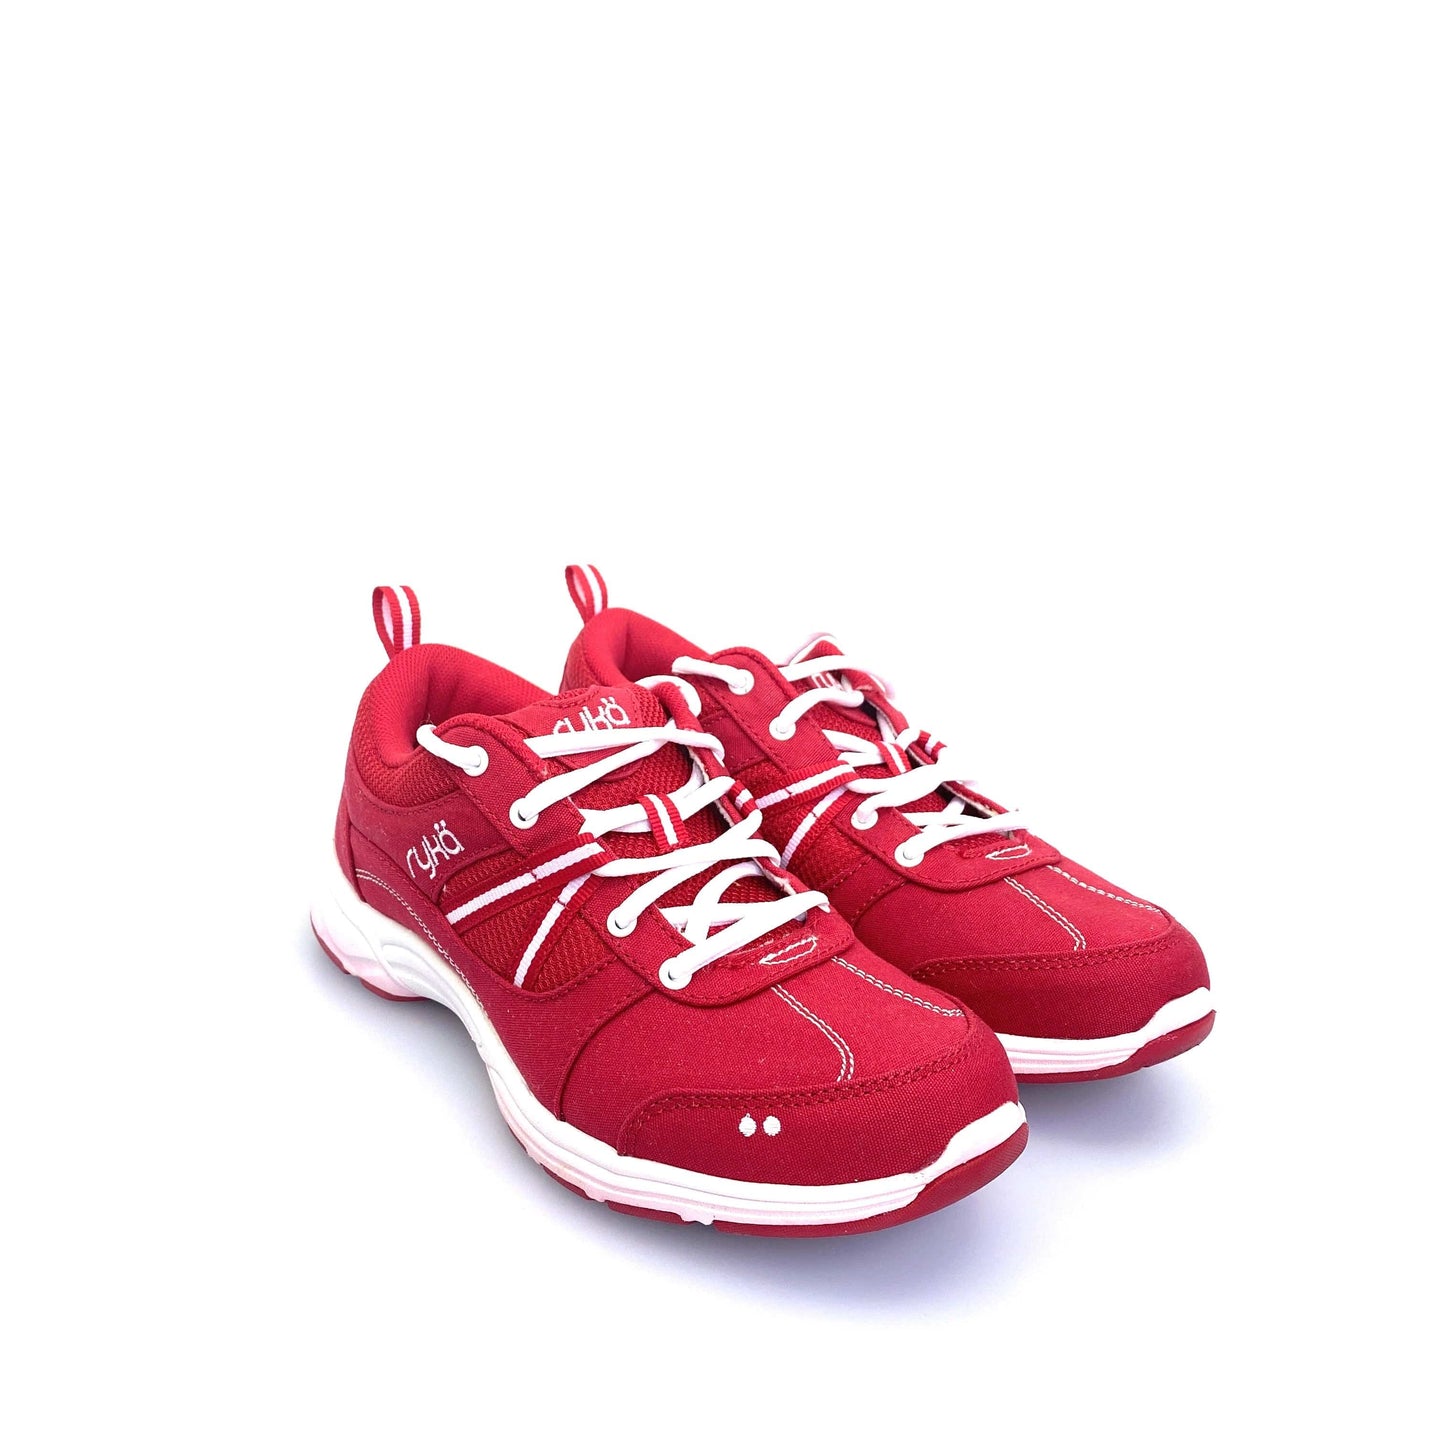 Rykä Crimson Red Tempo Walking Shoe, Size 6.5M Red/White Lace Up Shoes NEW